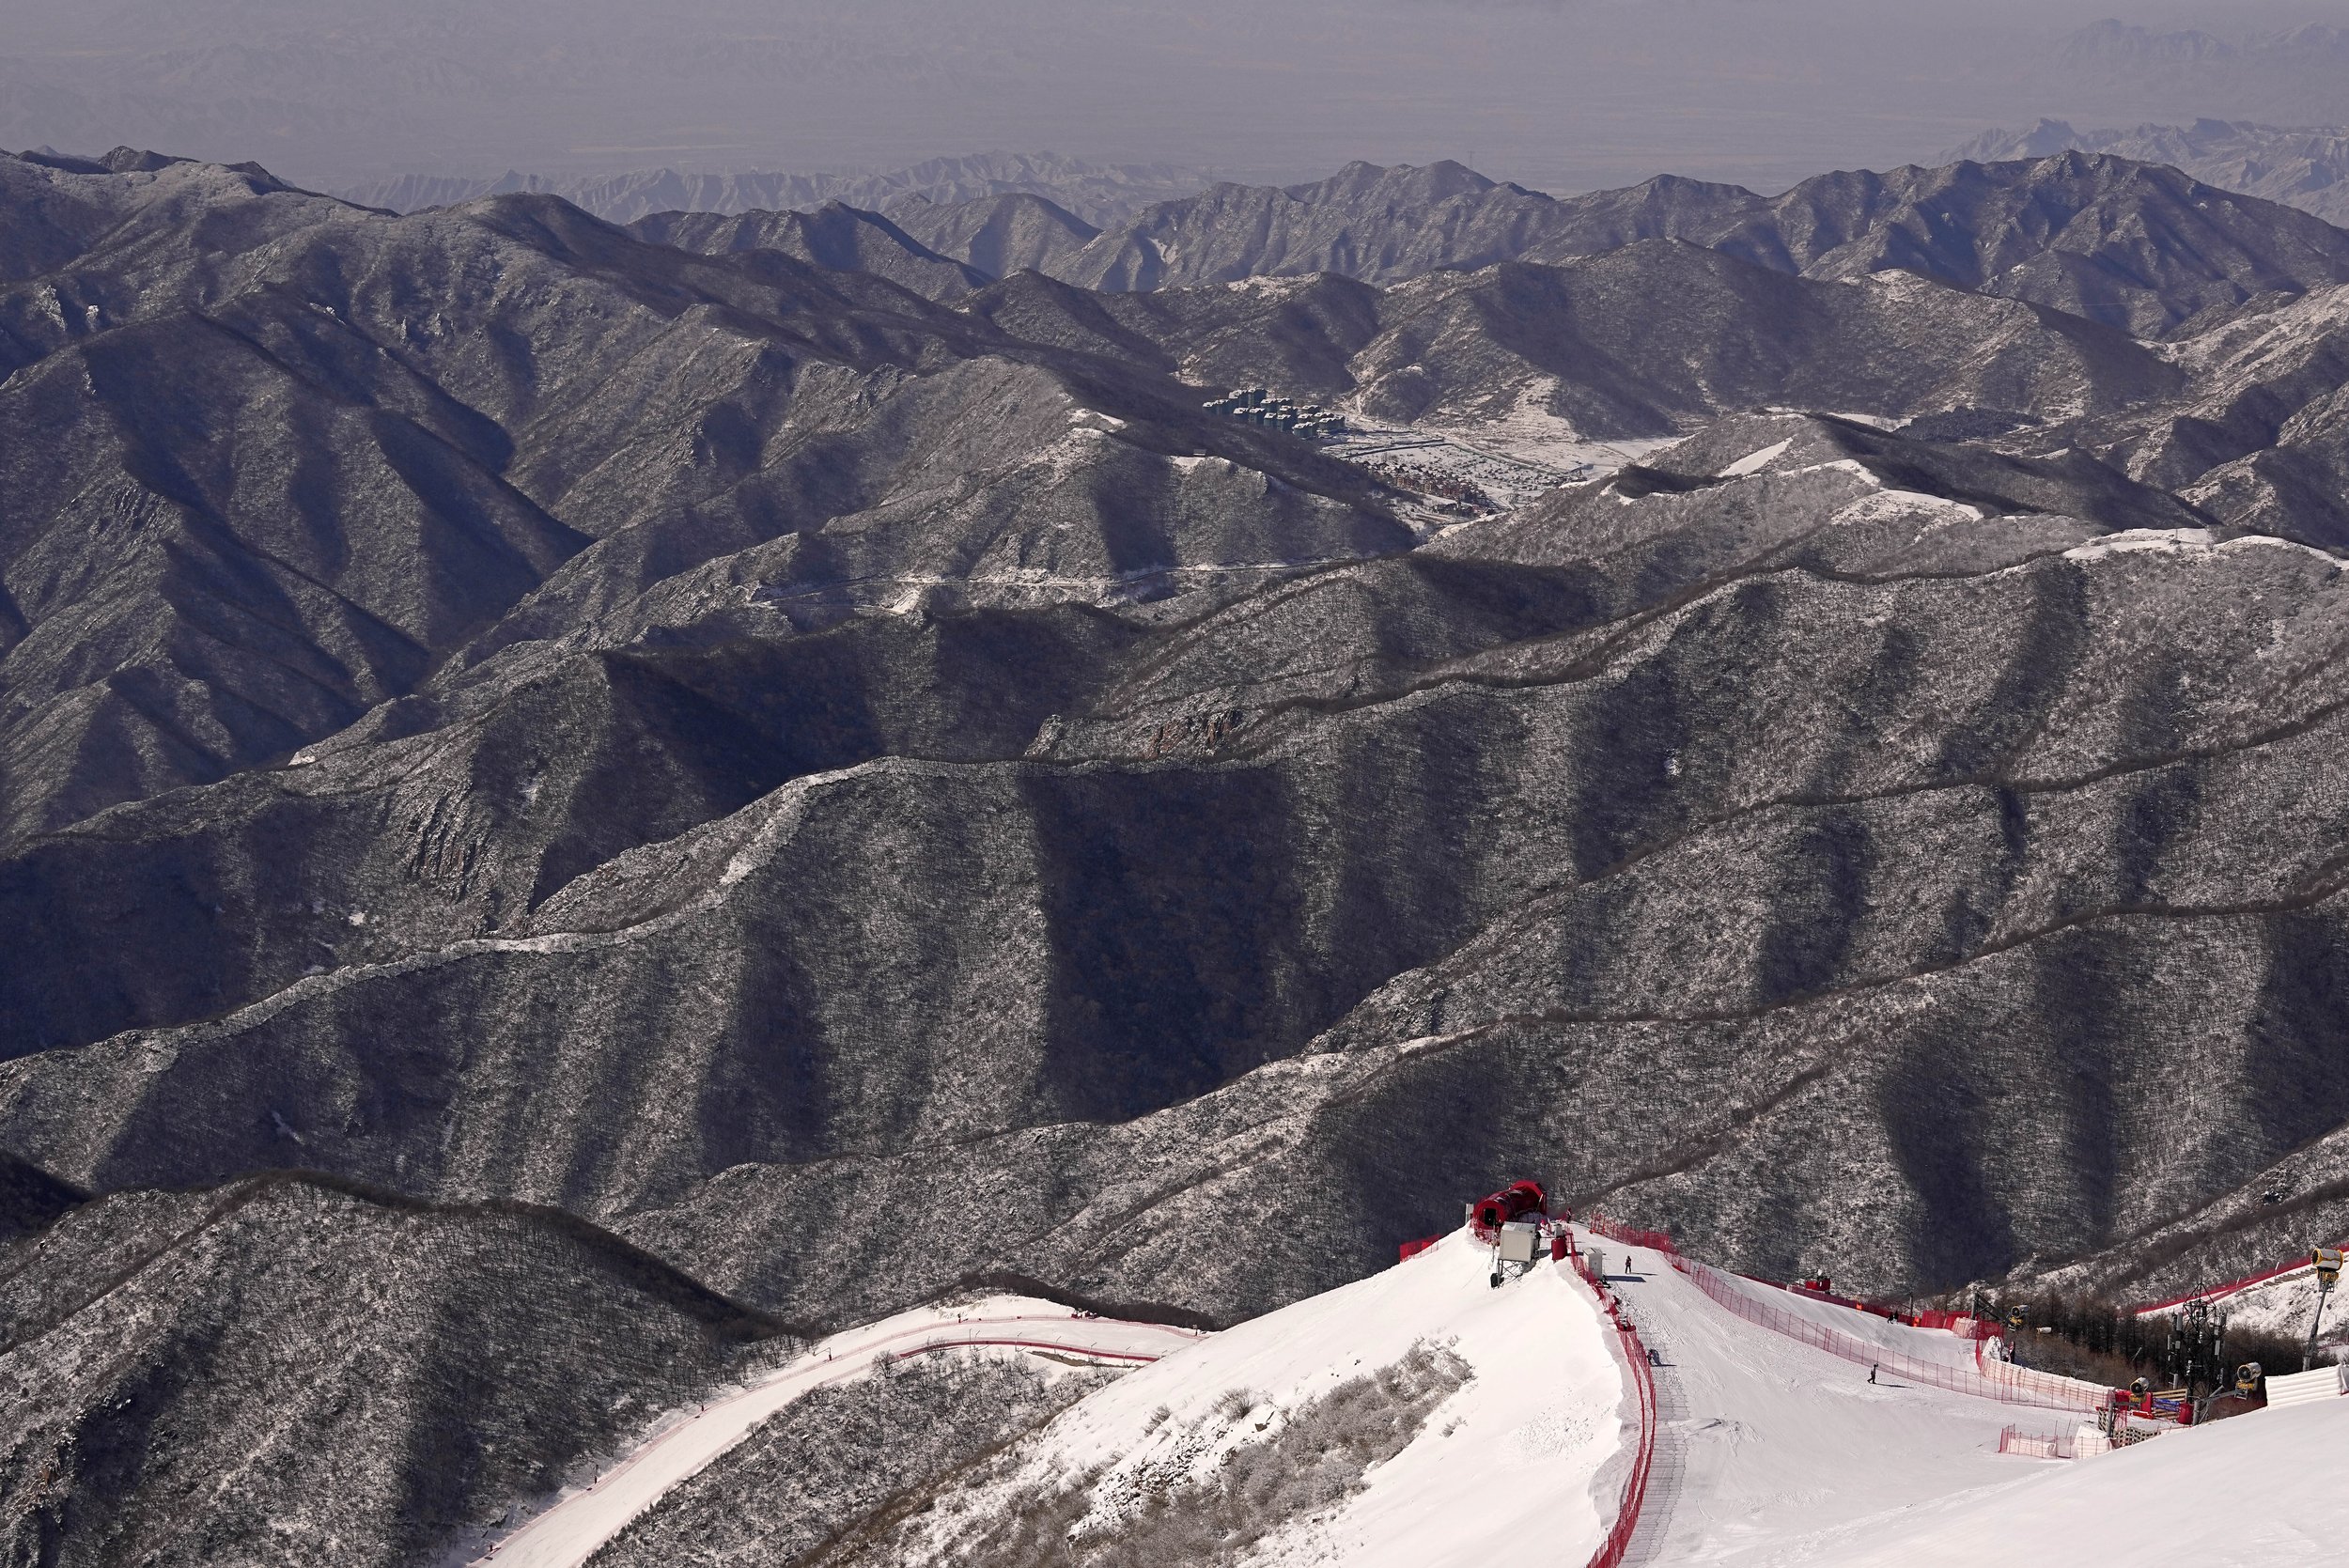  A view from the summit, near the start of the downhill course at the alpine ski venue at the 2022 Winter Olympics, Monday, Feb. 14, 2022, in the Yanqing district of Beijing. (AP Photo/Robert F. Bukaty) 